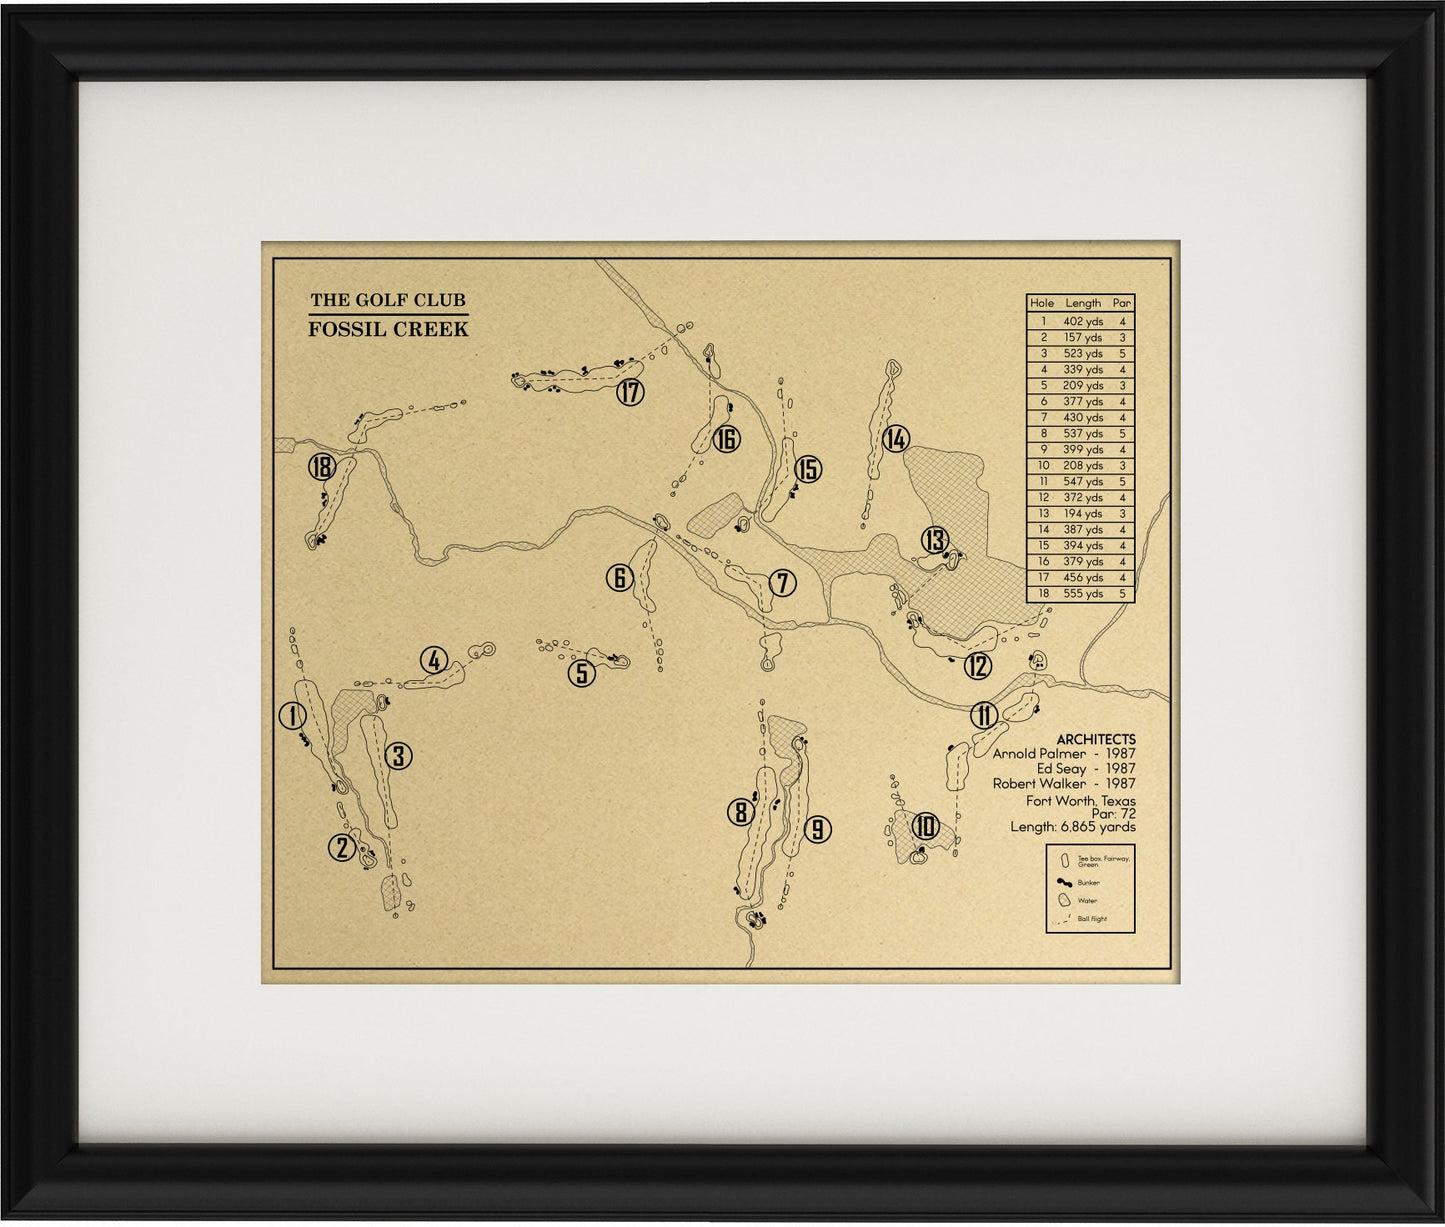 The Golf Club Fossil Creek Outline (Print)